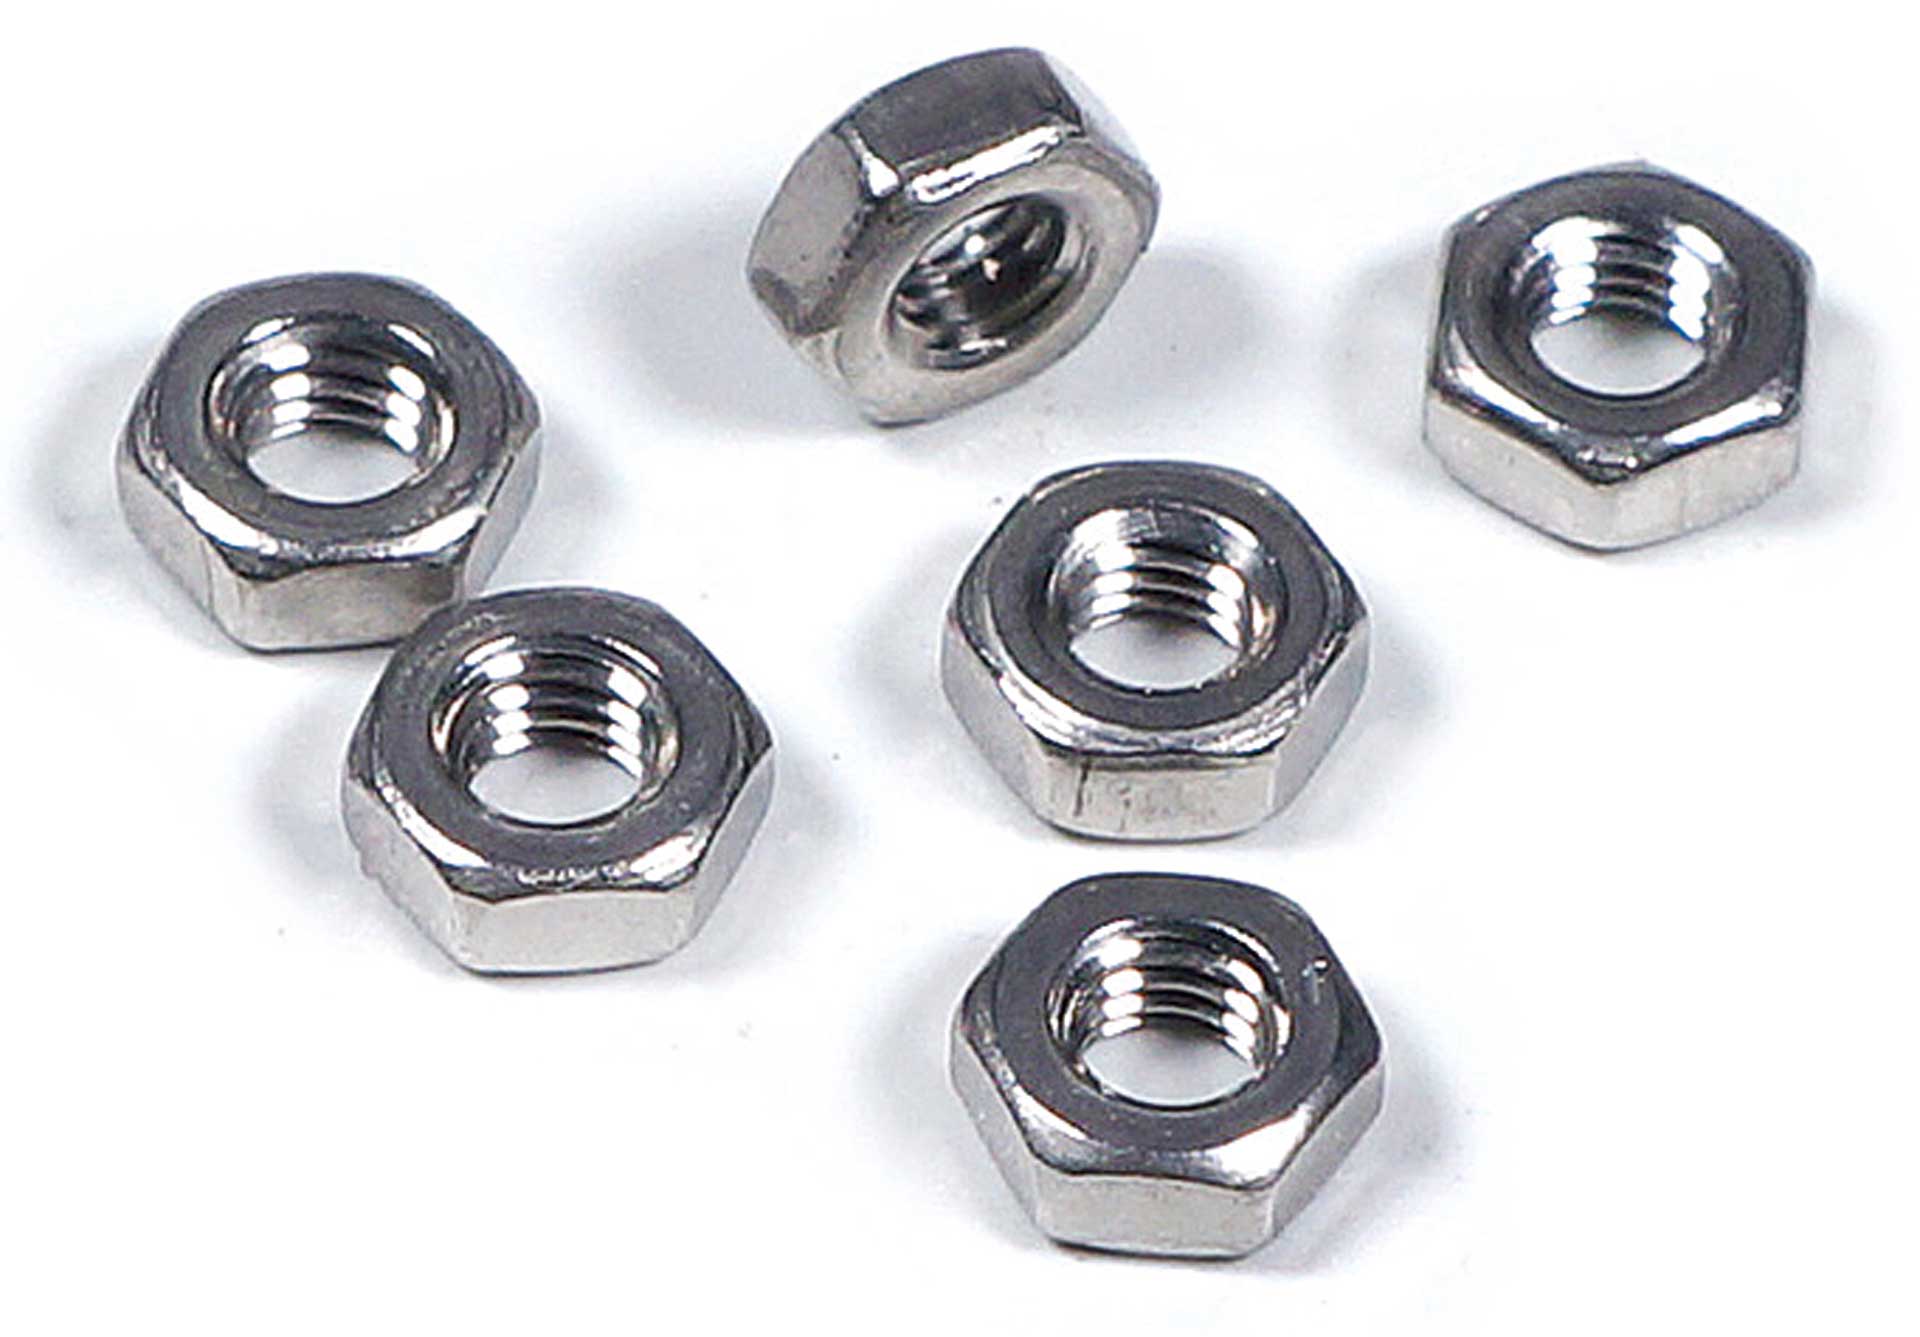 Robbe Modellsport Nuts M3 30pcs. stainless steel